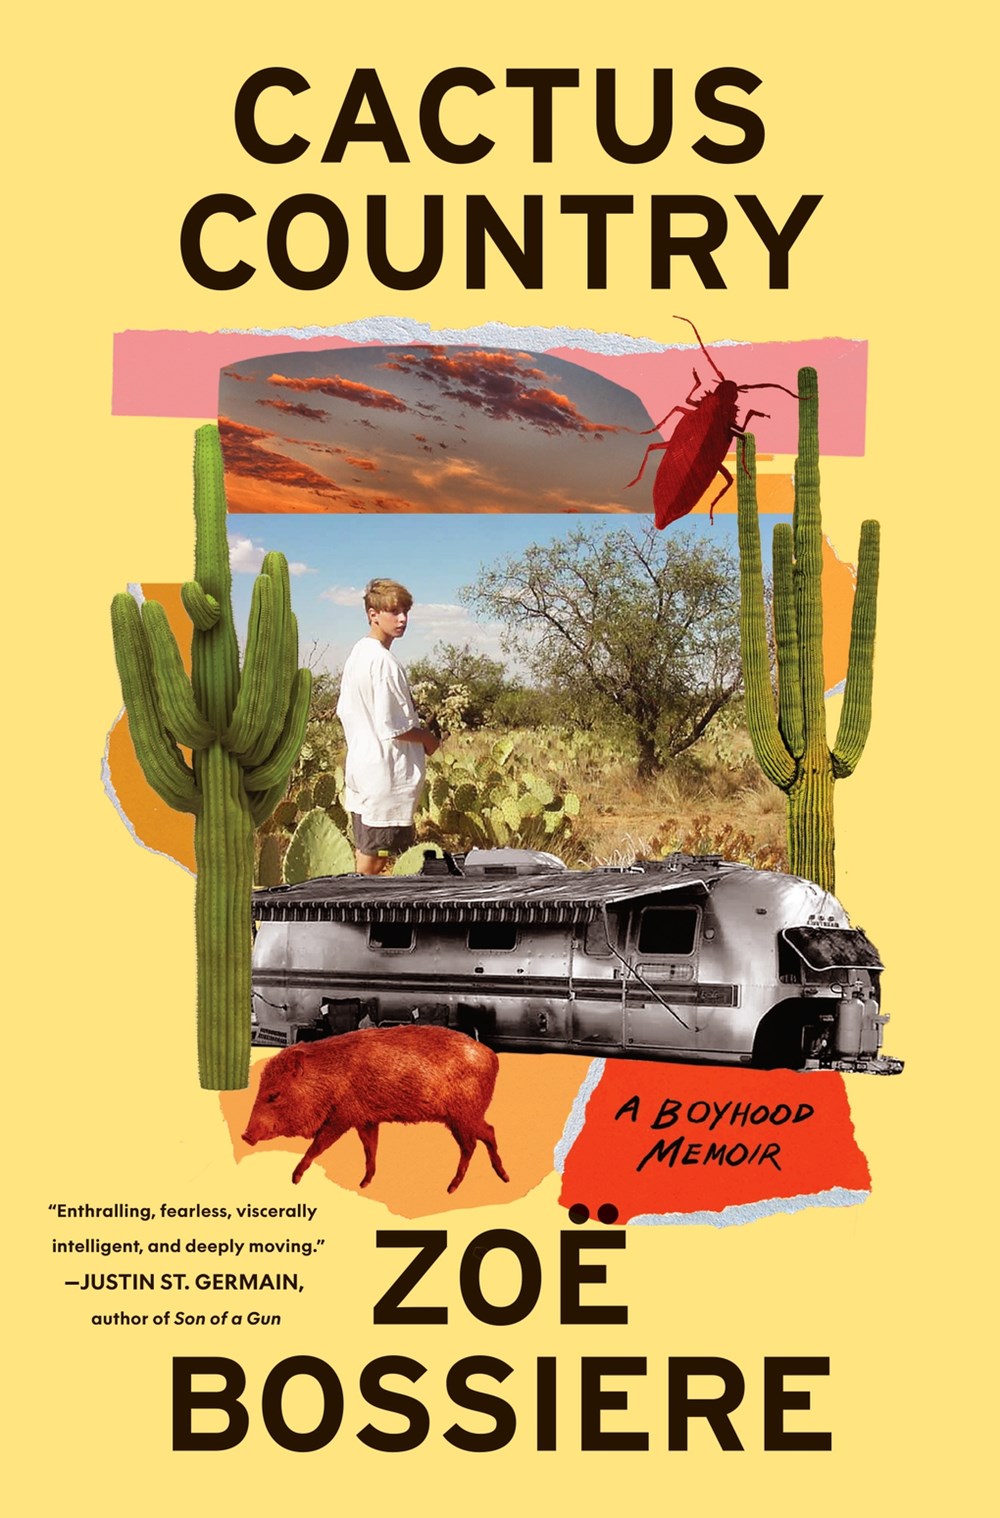 Cactus Country by Zoë Bossiere